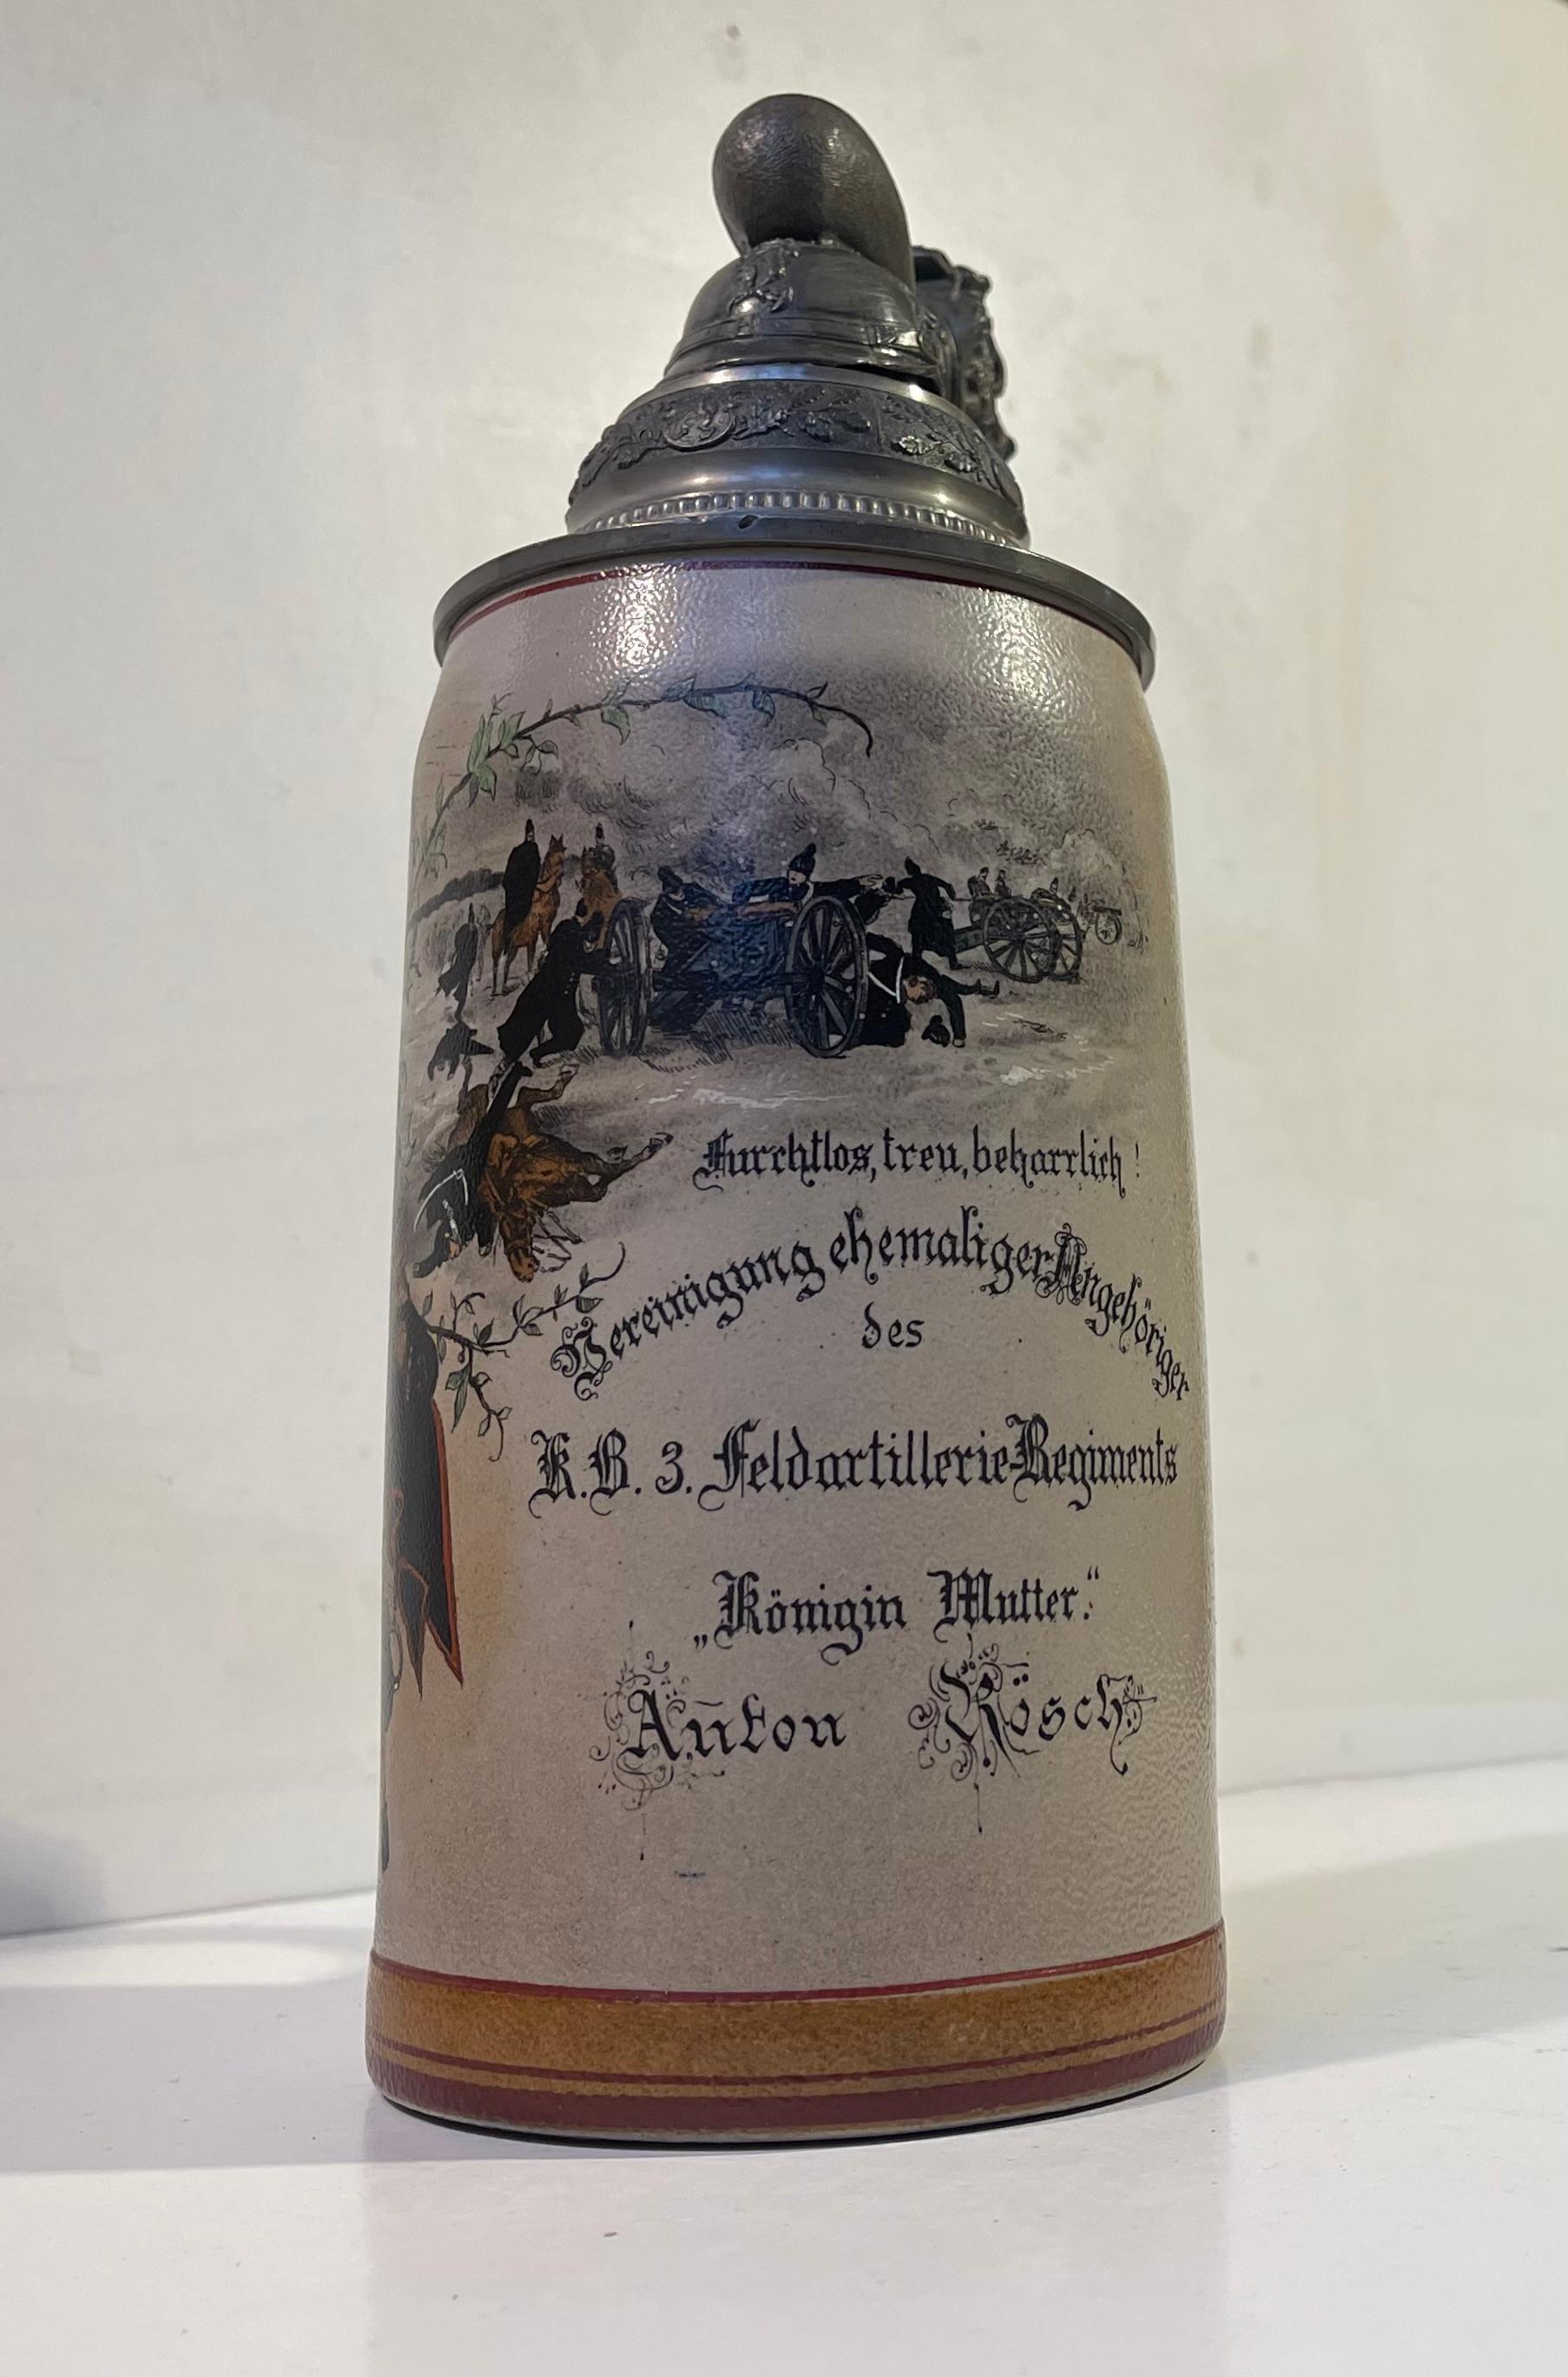 Very detailed ornamental Imperial German Bier Stein hand-painted with WW1 scene commemorative of KB3 Feldartillerie Regiment. The pewter top features the Bavarian Lion and the imperial German Fireman's Helmet. Its corpus is made from stoneware and